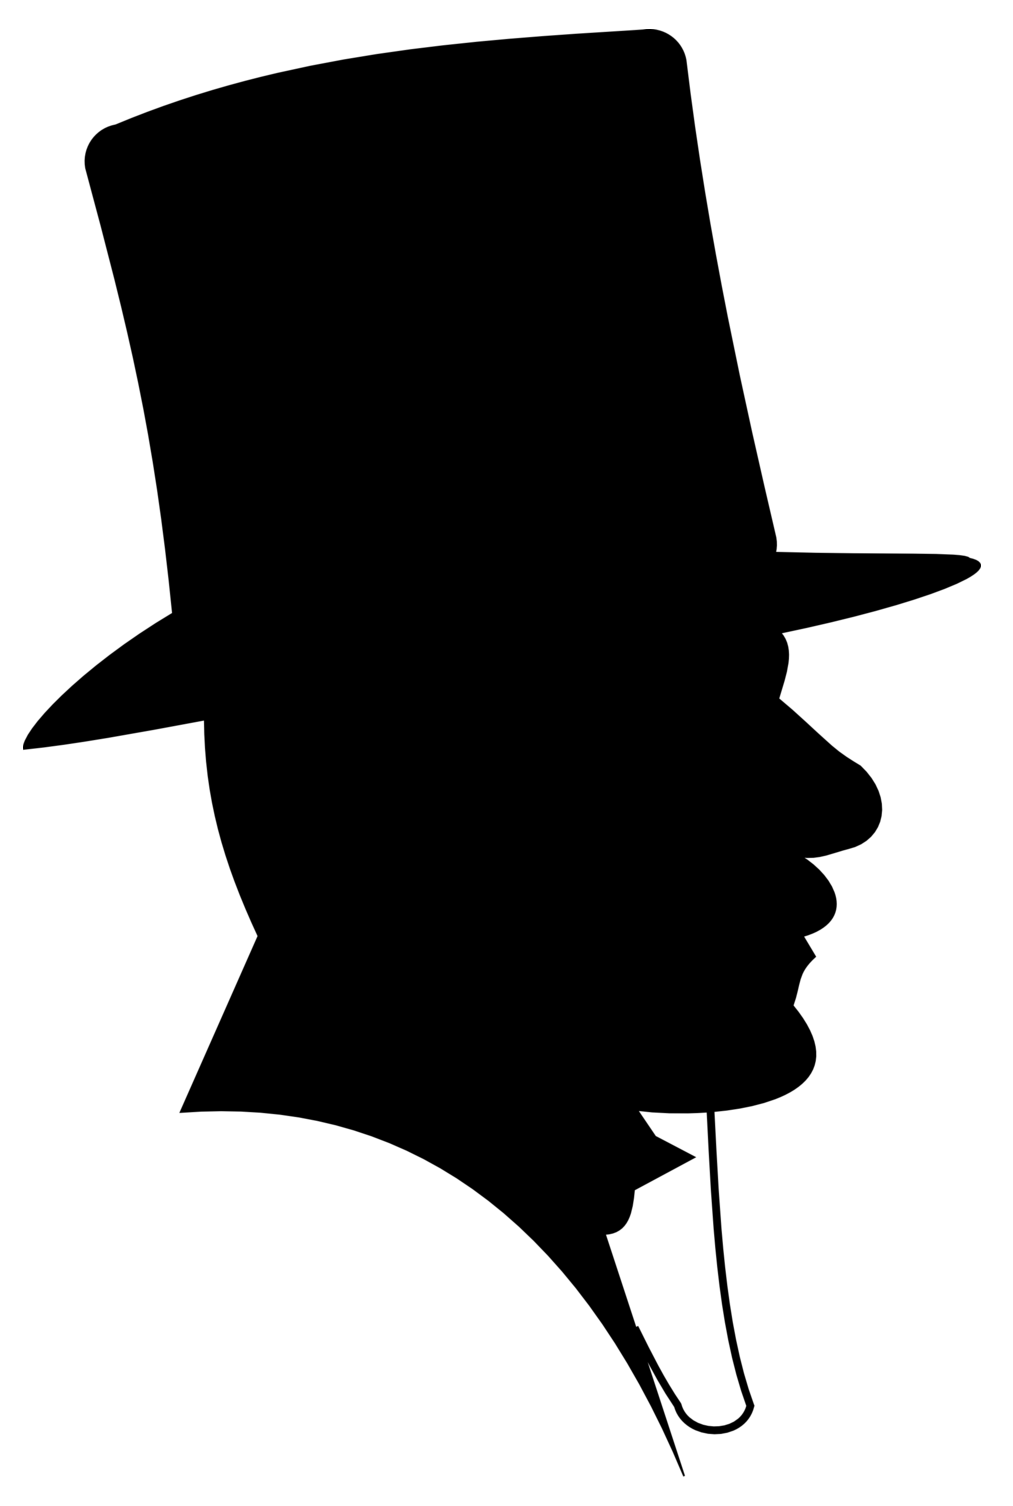 The Ringleader - Man In Top Hat Silhouette (1013x1506)